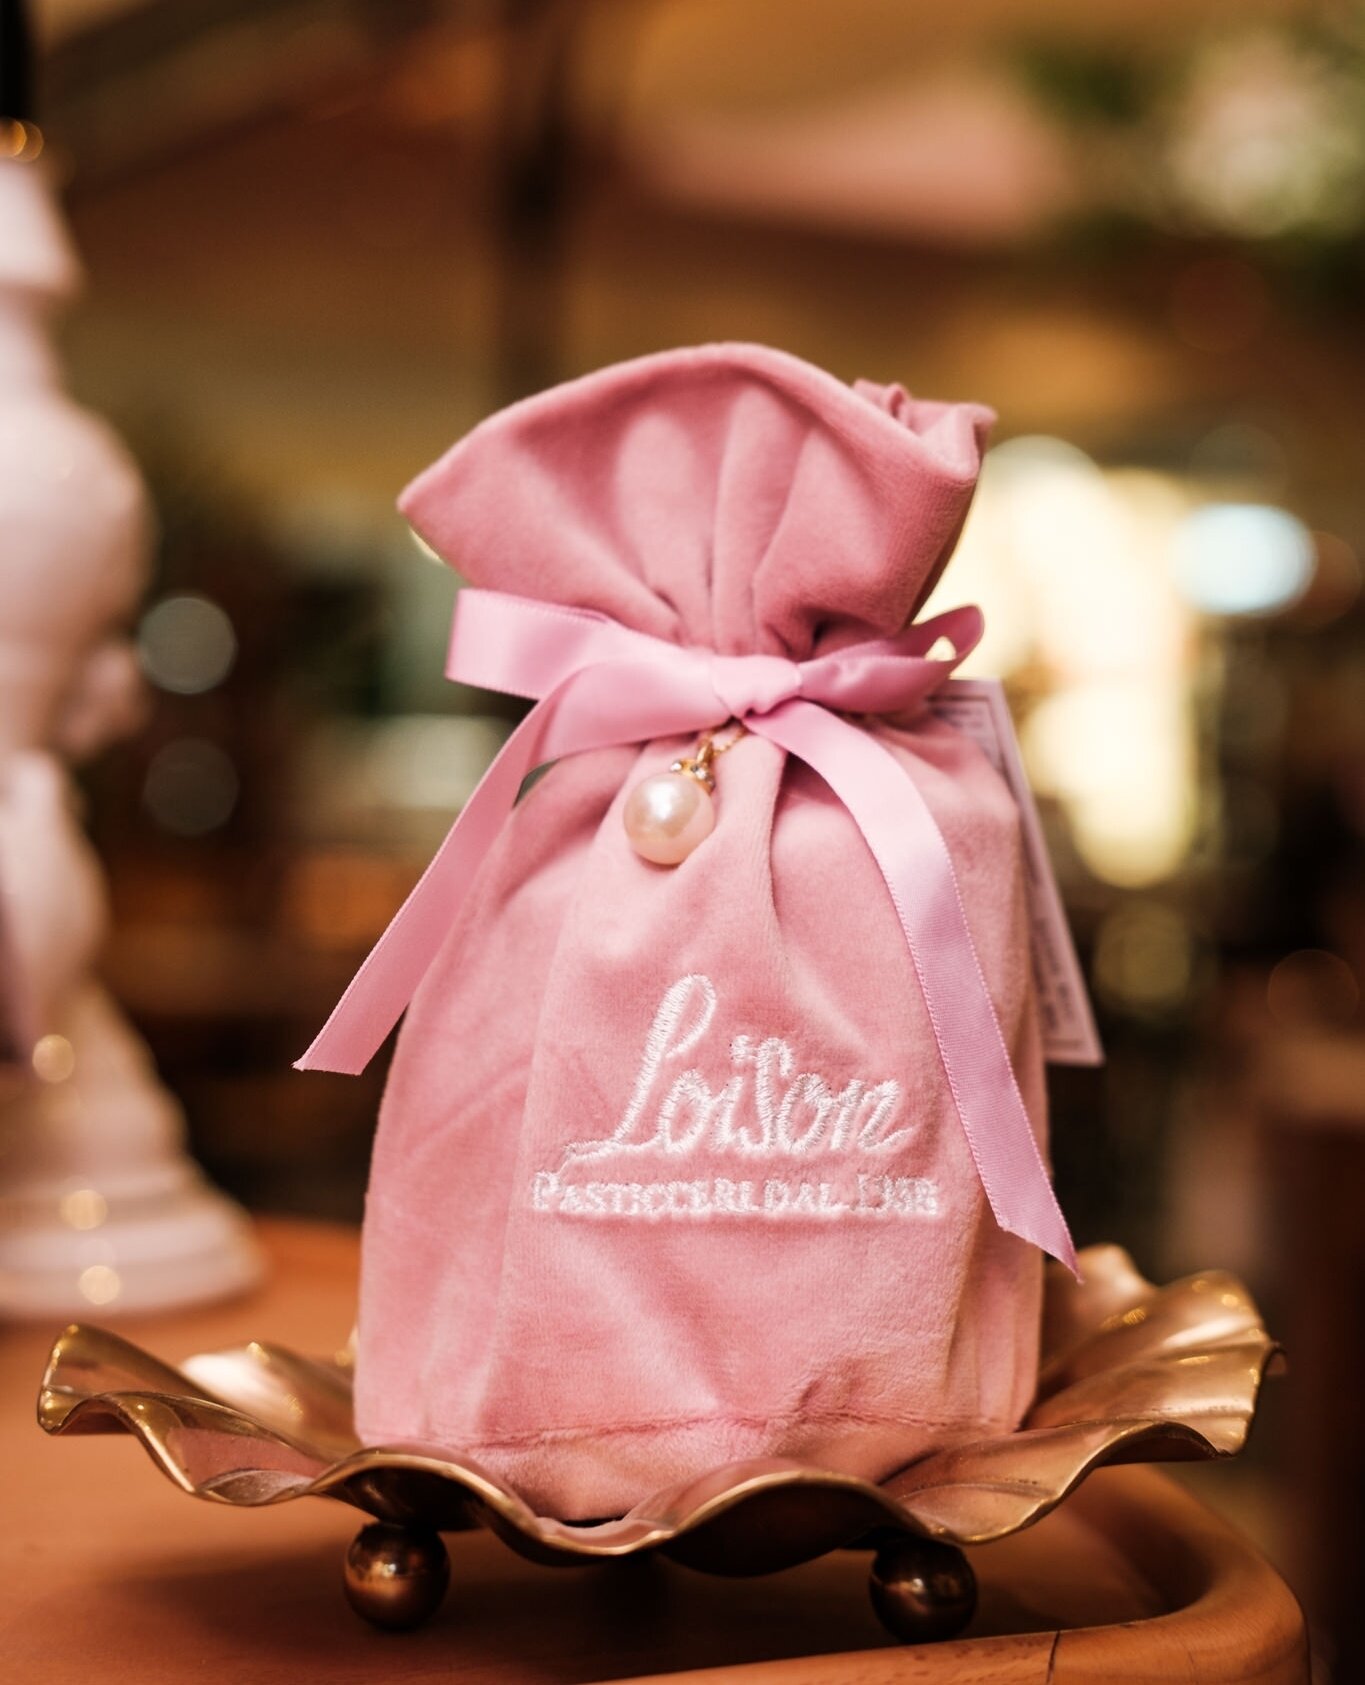 A classic, artisinal mini-pandoro cake in a bag. Sweet, rich with butter, cuddled in a velvety pink bag and hugged with a bow. How could you not?

#minipandoro #loisonpandoro #christmas #italianchristmas #stockingfiller #gifts #deli #leparc #leparc